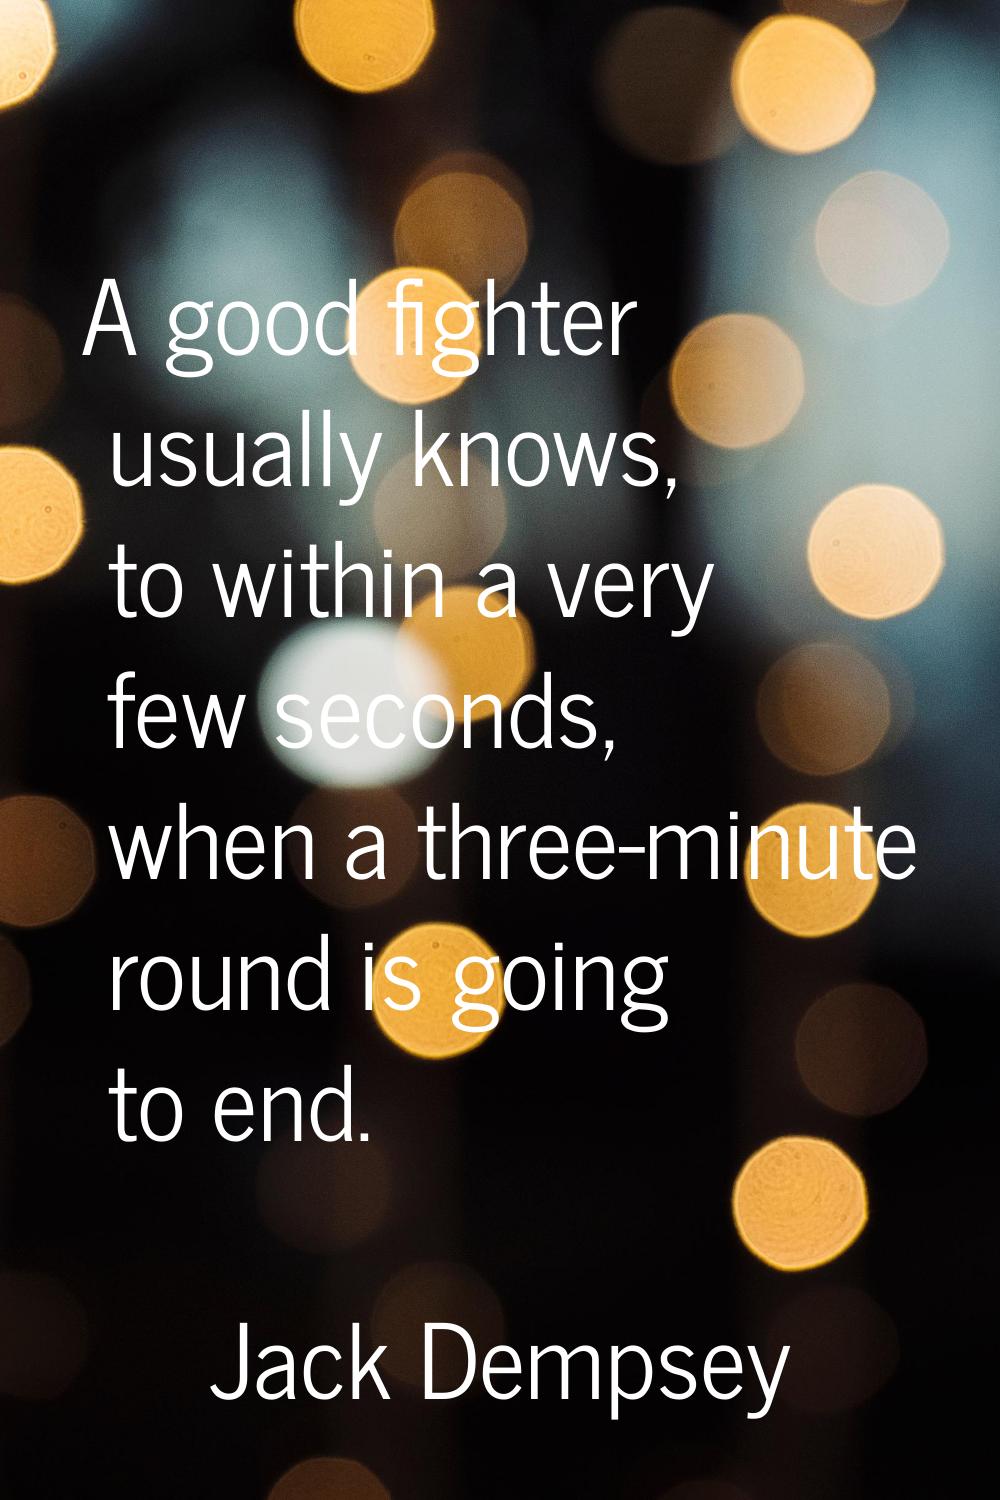 A good fighter usually knows, to within a very few seconds, when a three-minute round is going to e